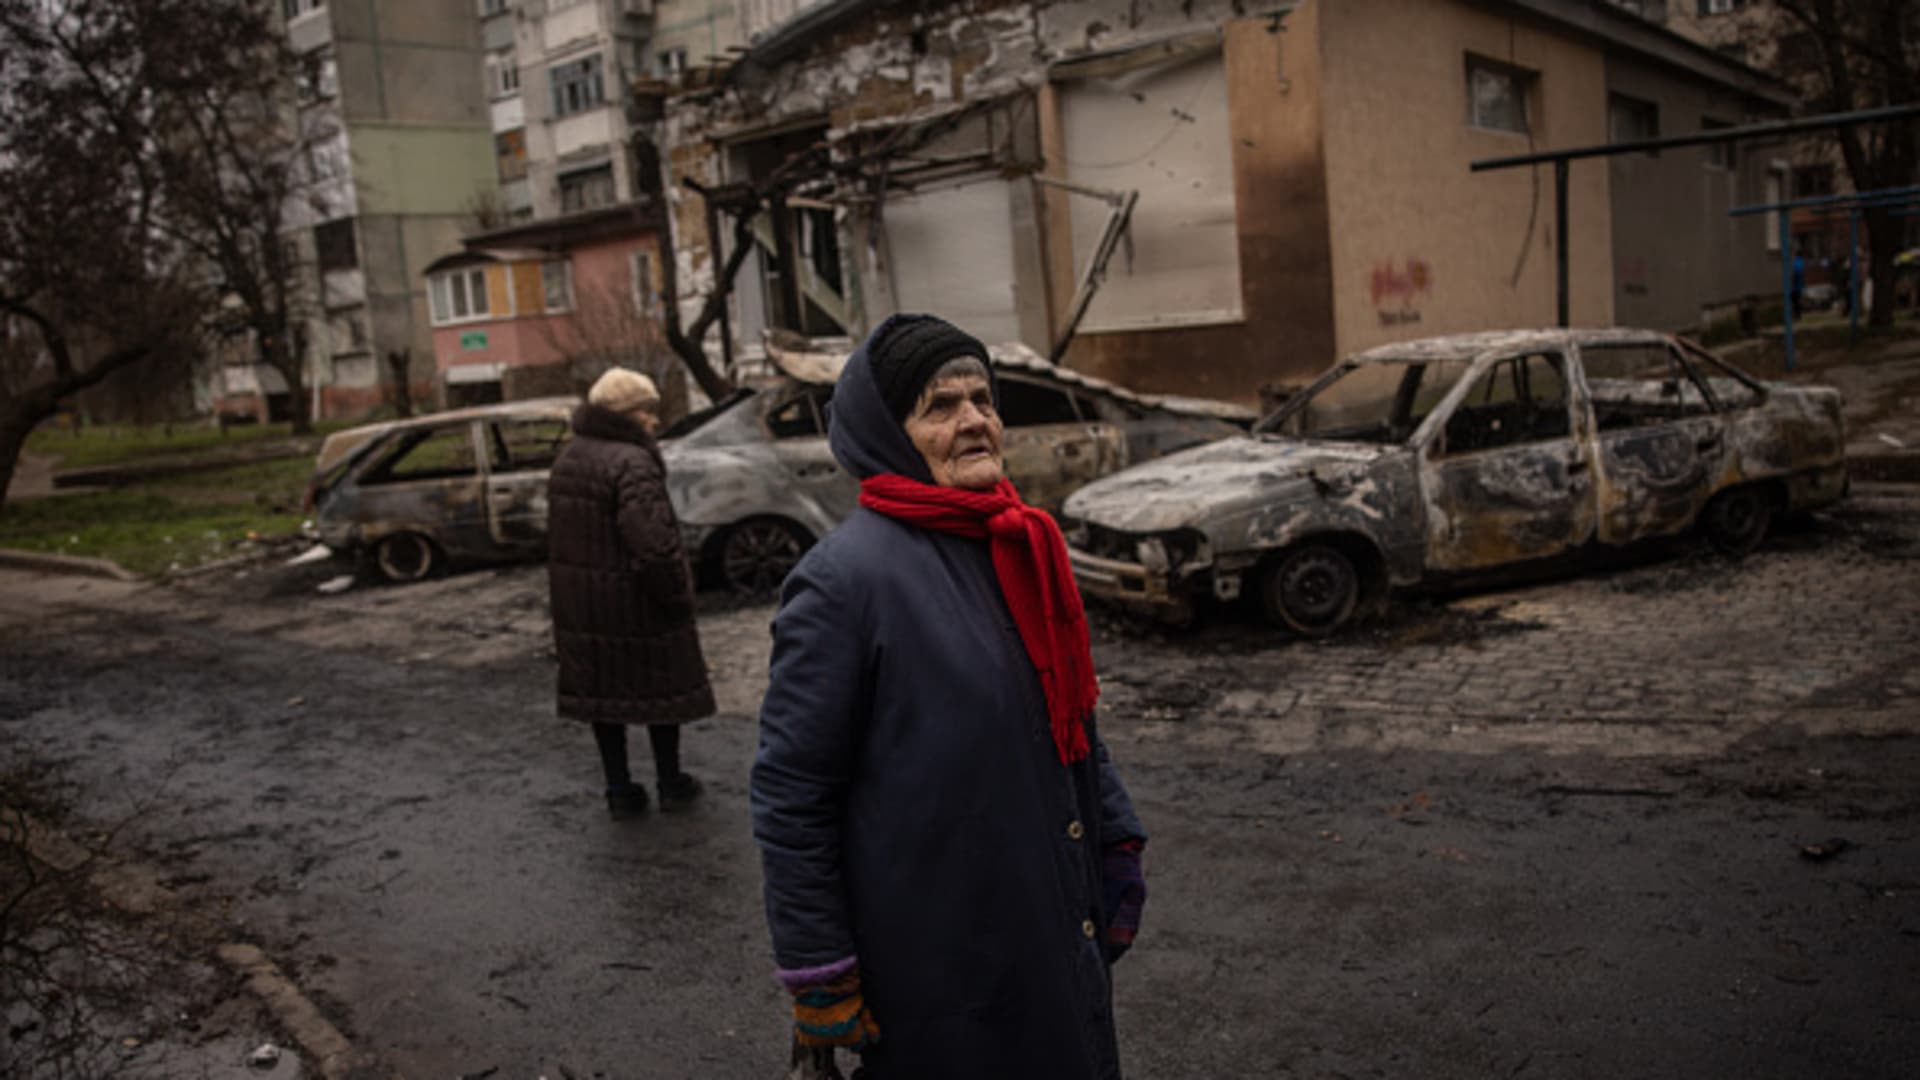 An elderly woman looks at damaged caused by overnight Russian shelling of a residential building on Dec. 1, 2022 in Kherson, Ukraine.